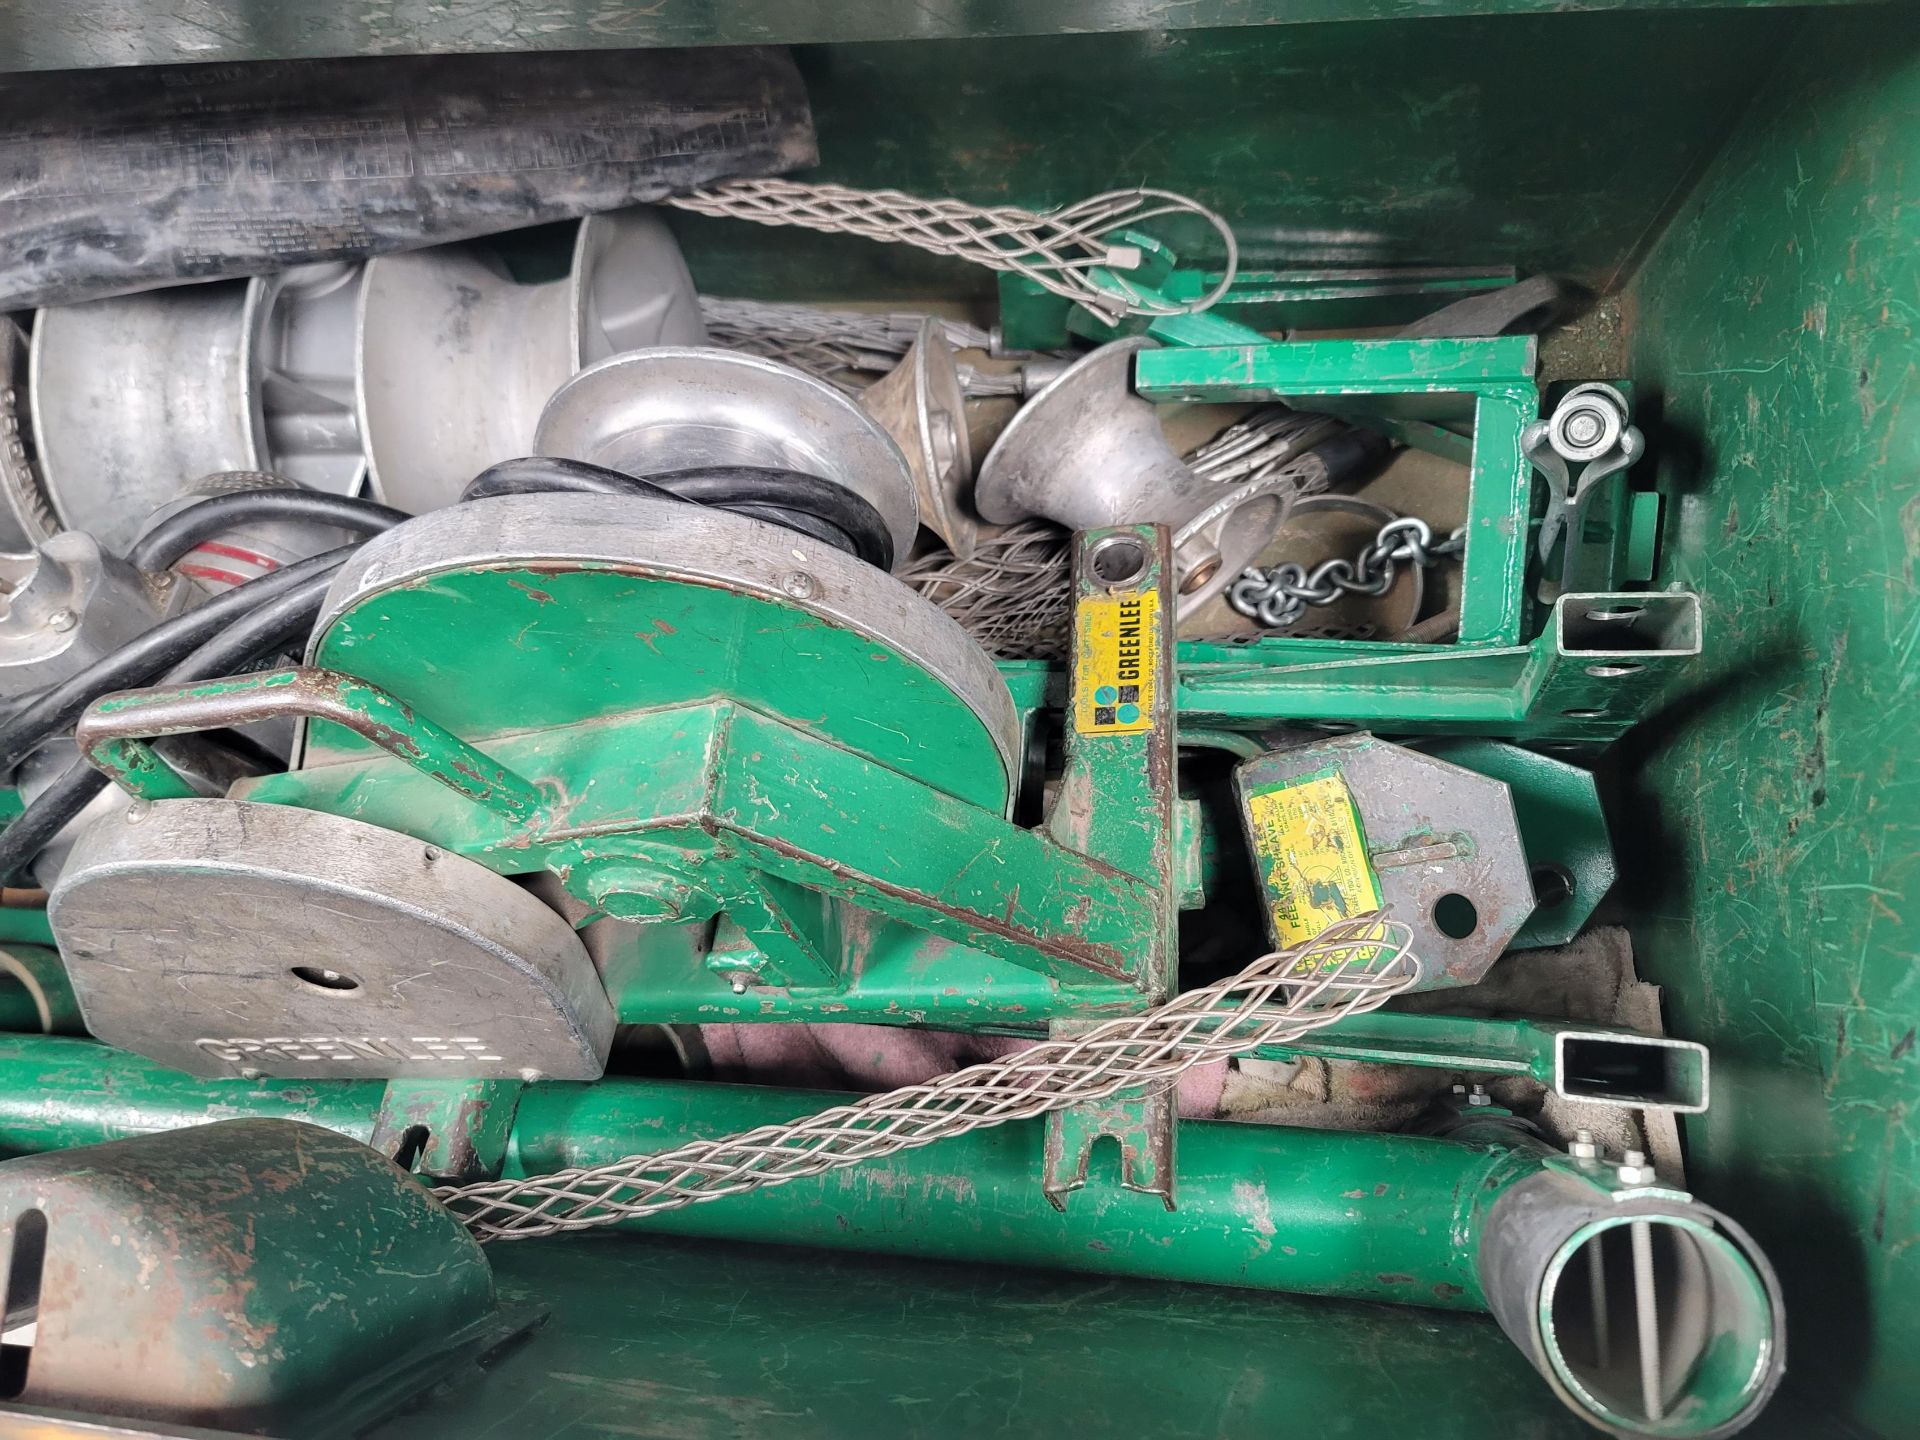 LOT - GREENLEE 640 ELECTRIC WIRE & CABLE PULLER W/ ALL PARTS & ACCESSORIES IN JOB BOX, BOX - Image 4 of 5